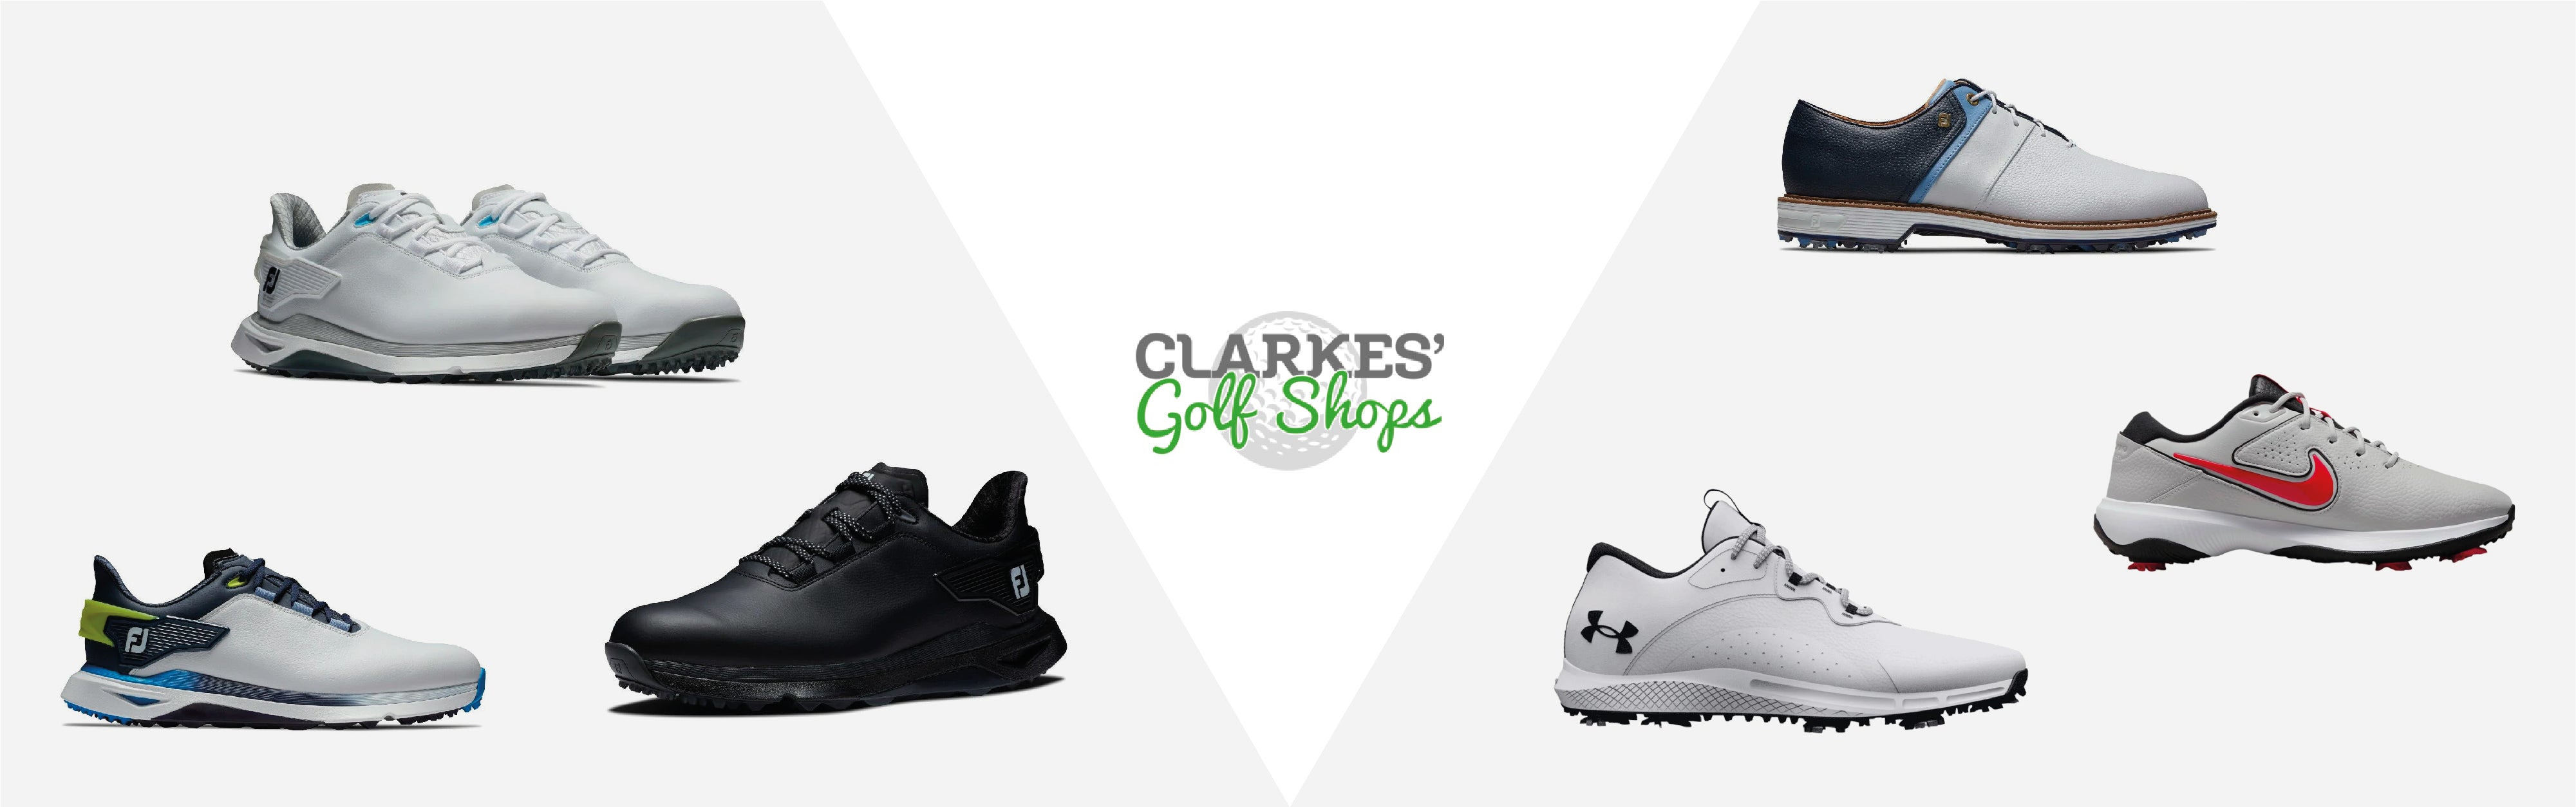 Should you wear spiked or spikeless golf shoes when playing in the rain? Blog Image